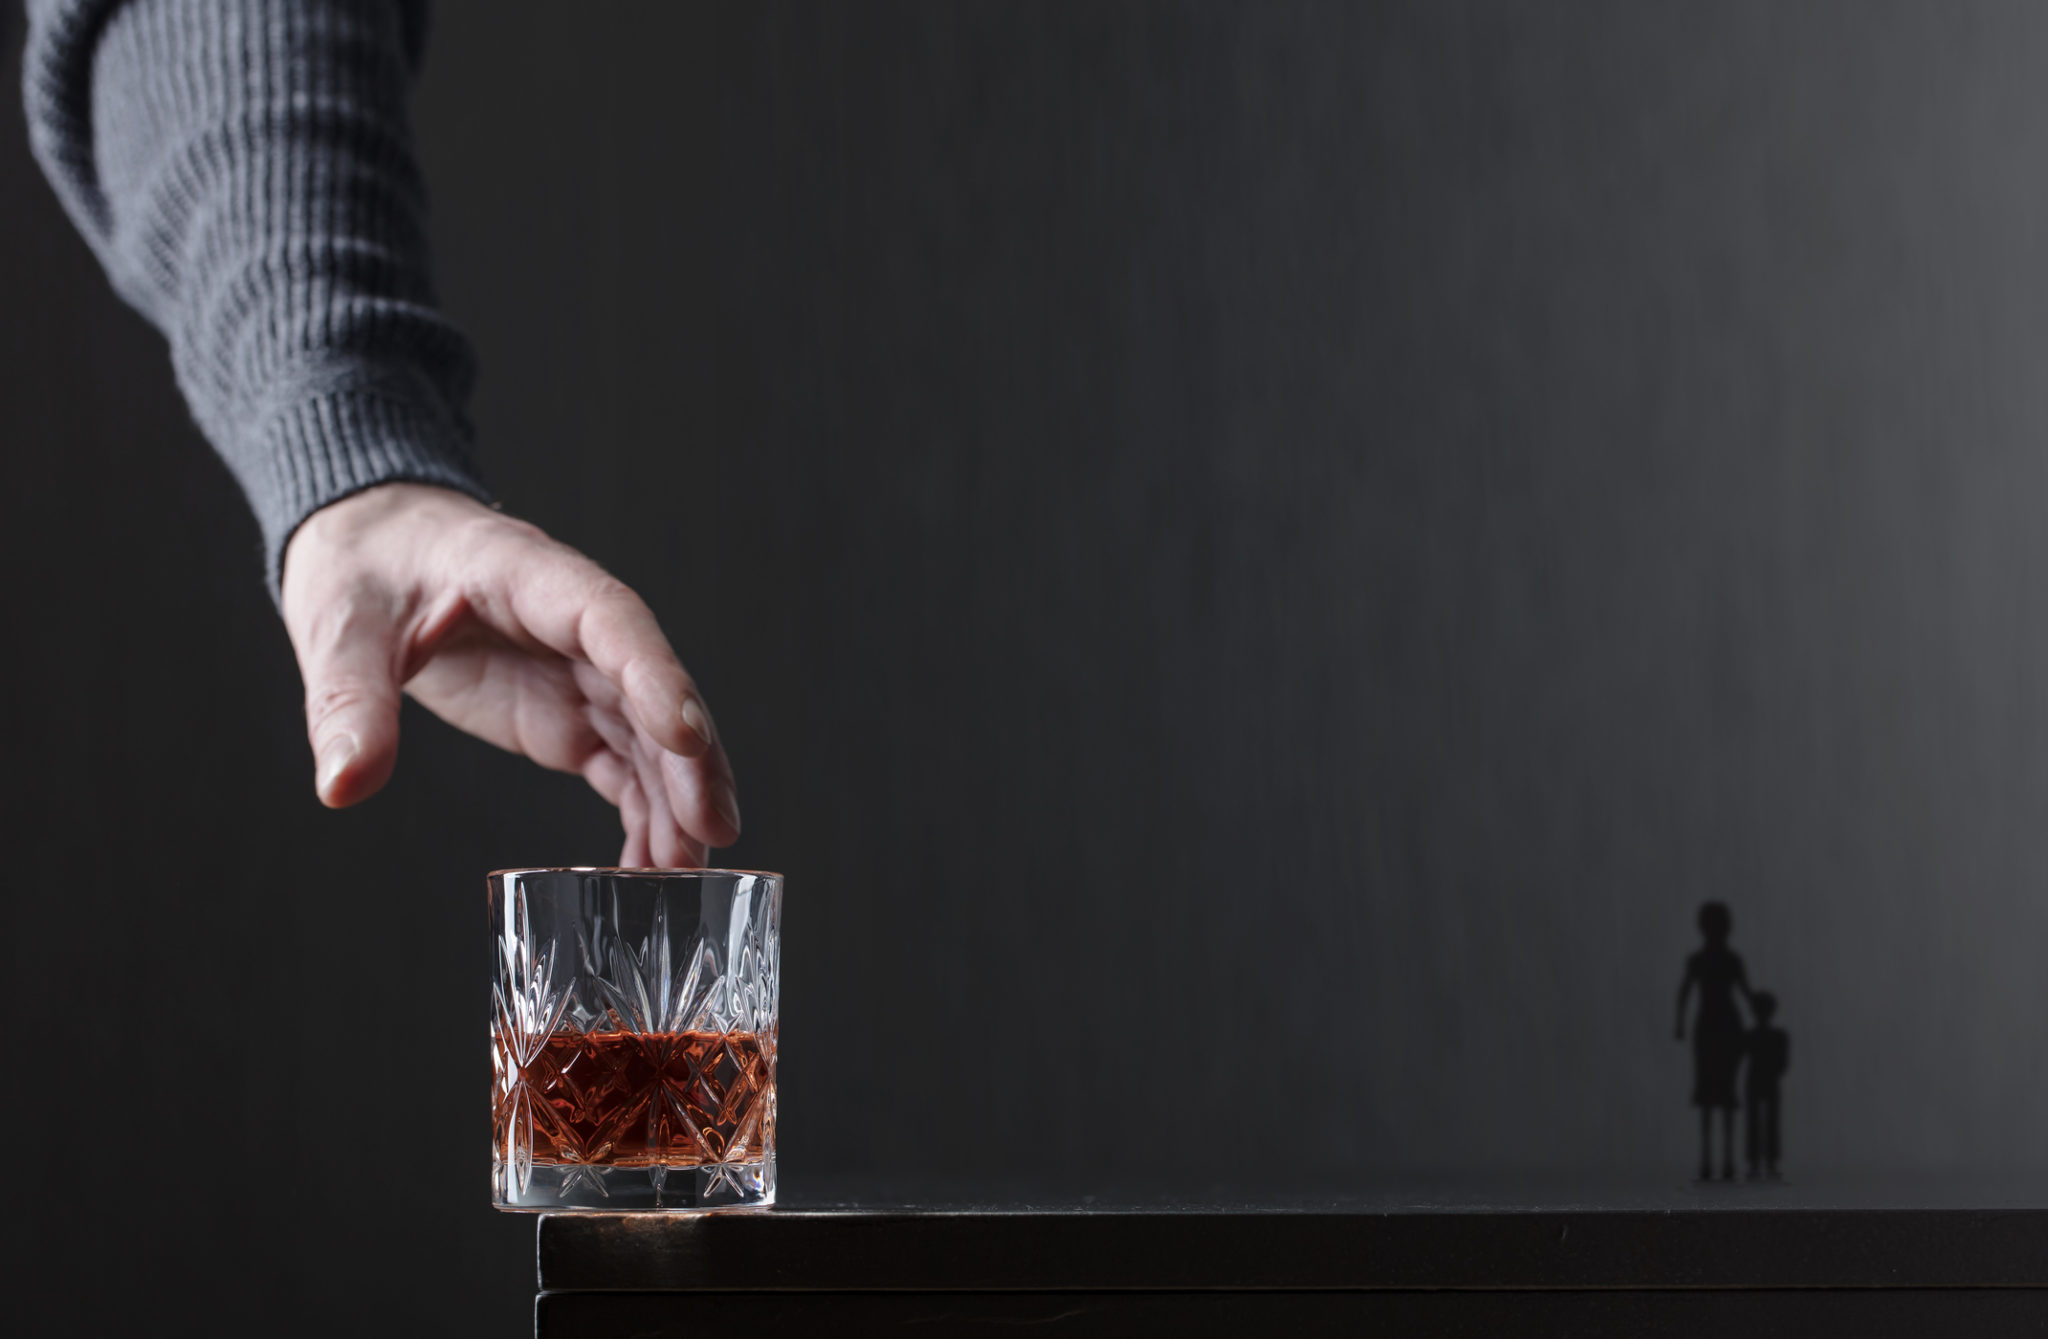 Man's hand reaching for glass of whisky (alcoholic spouse)